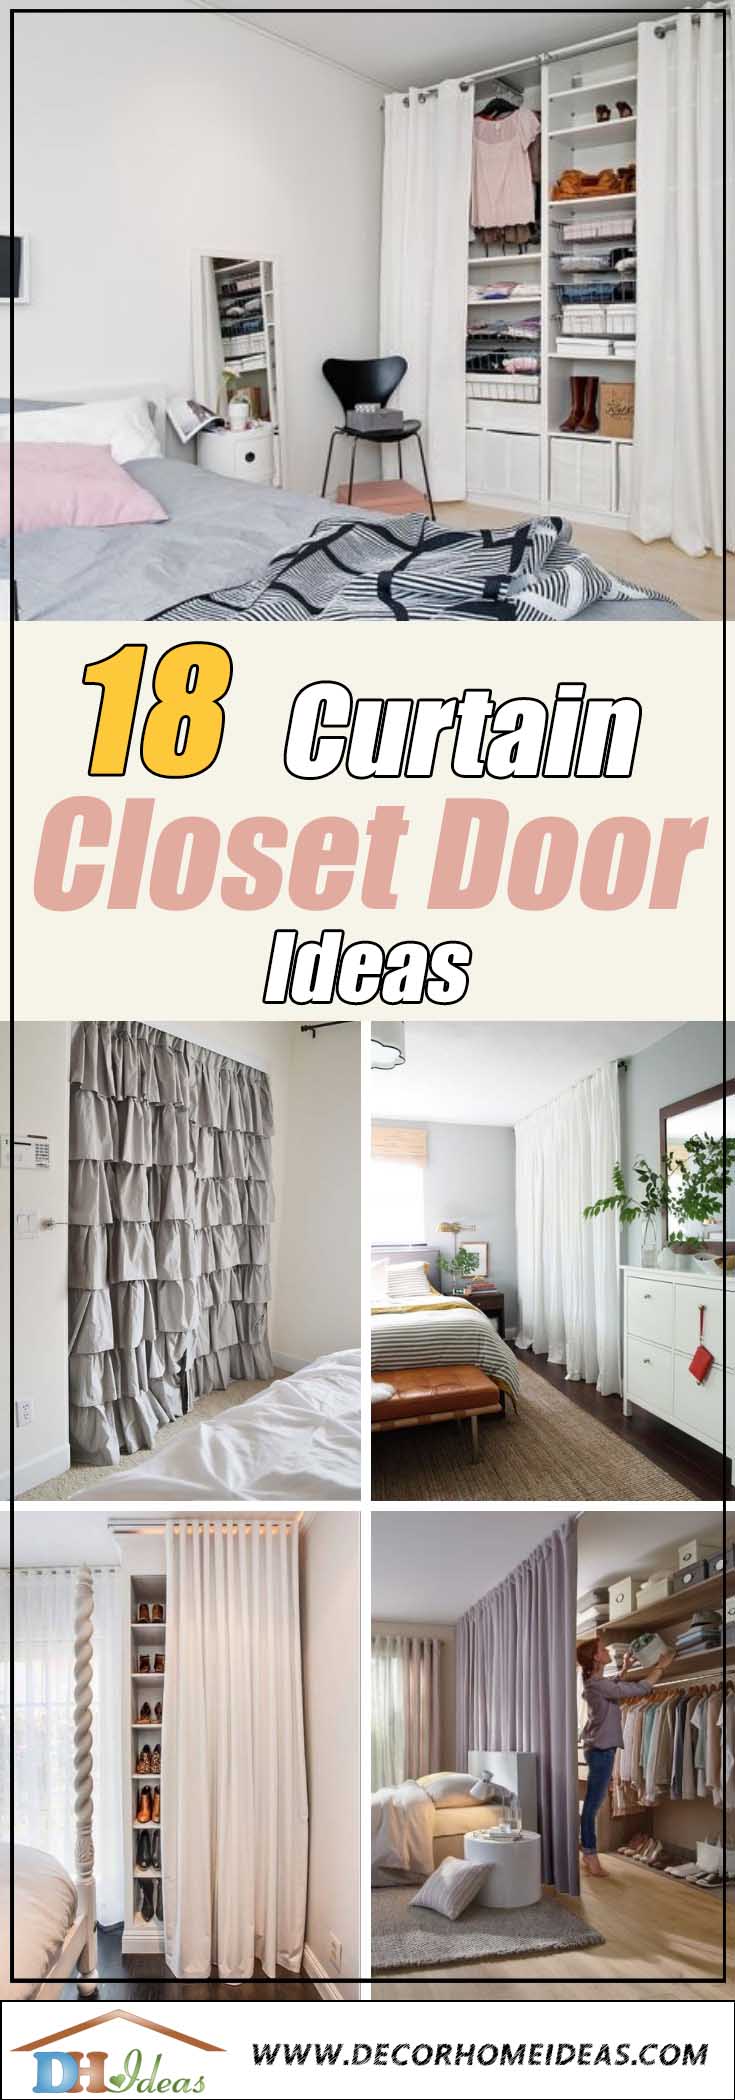 18 Tidy Curtain Closet Doors To Conquer The Mess | Decor Home Ideas